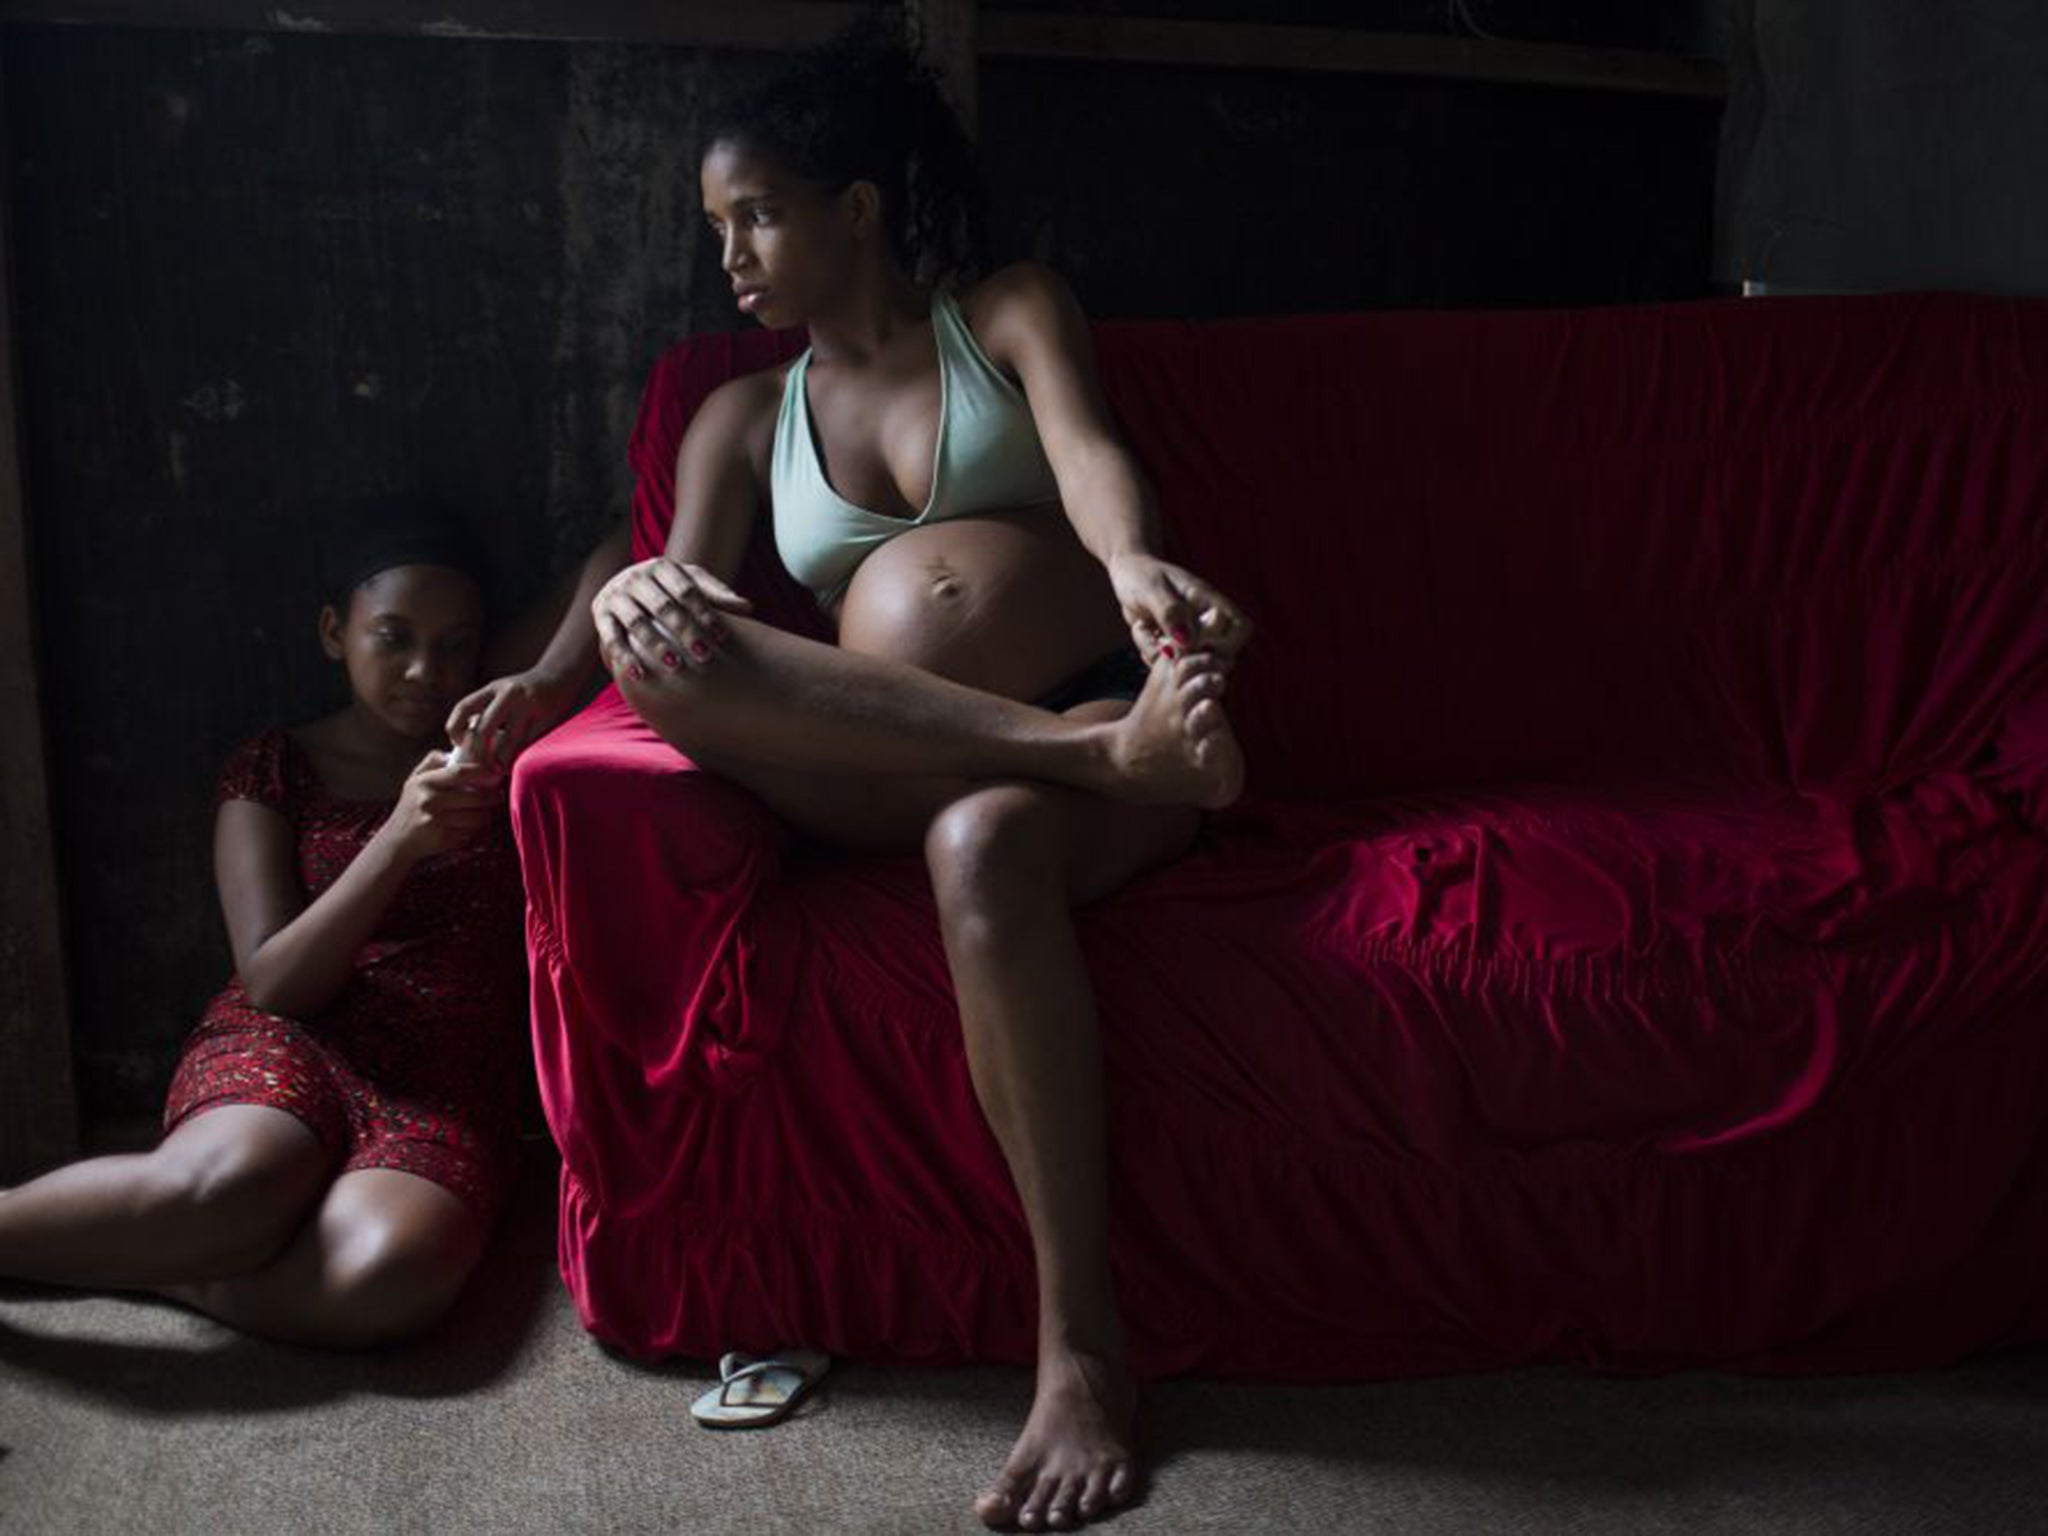 Many pregnant women in Brazil are forced to remain indoors as they cannot afford mosquito repellent